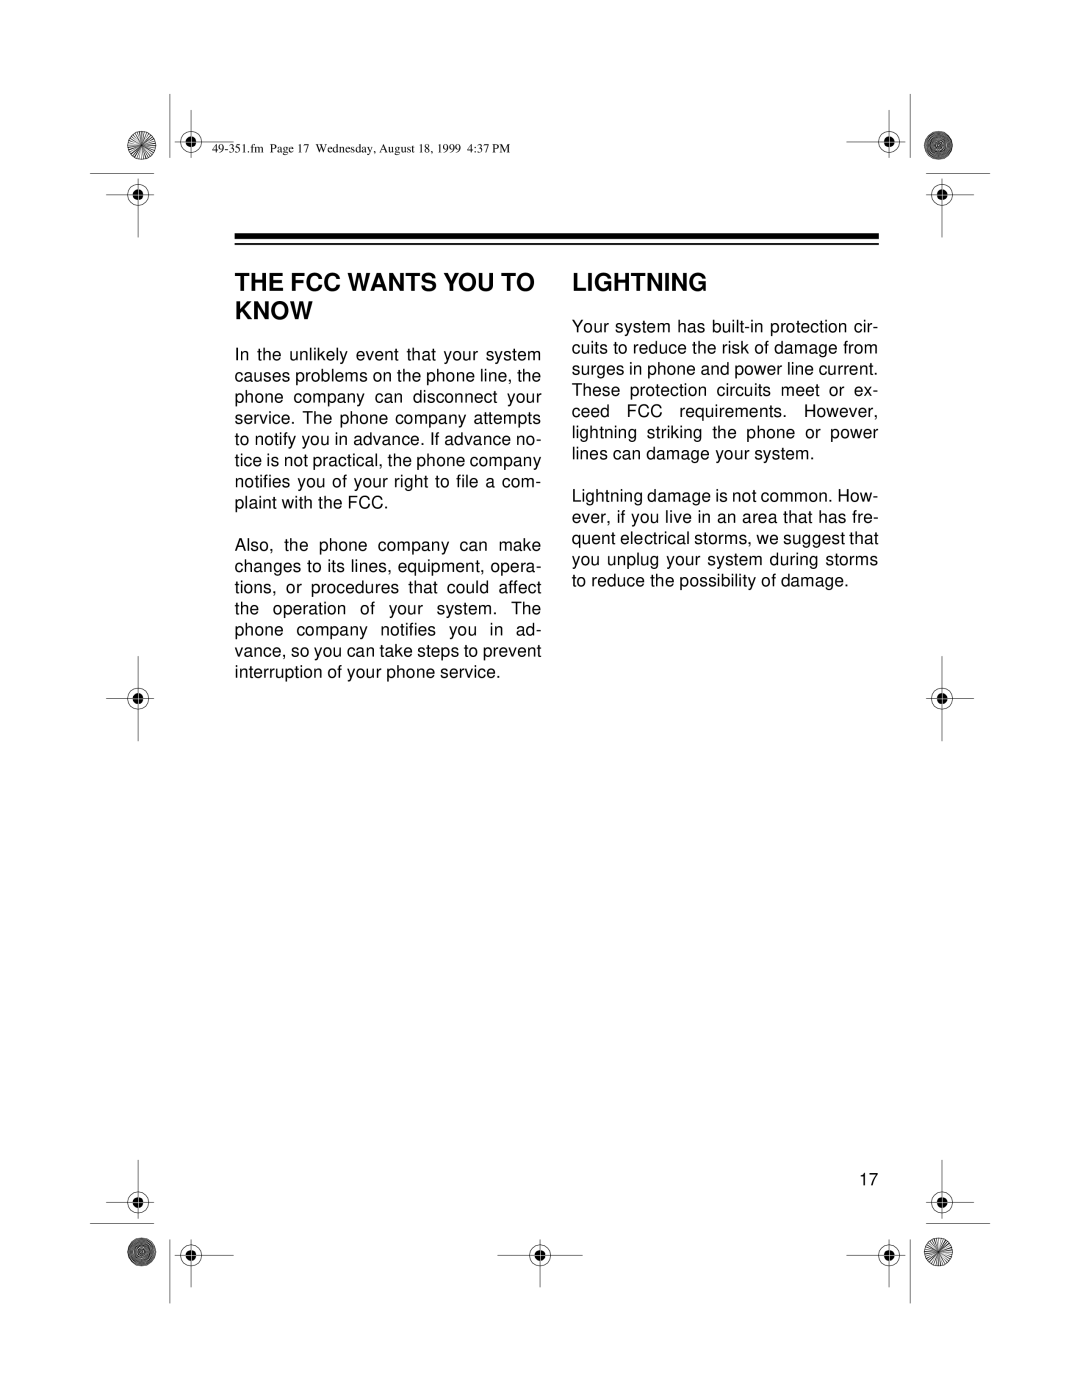 Radio Shack 49-351 owner manual The Fcc Wants You To Know, Lightning 